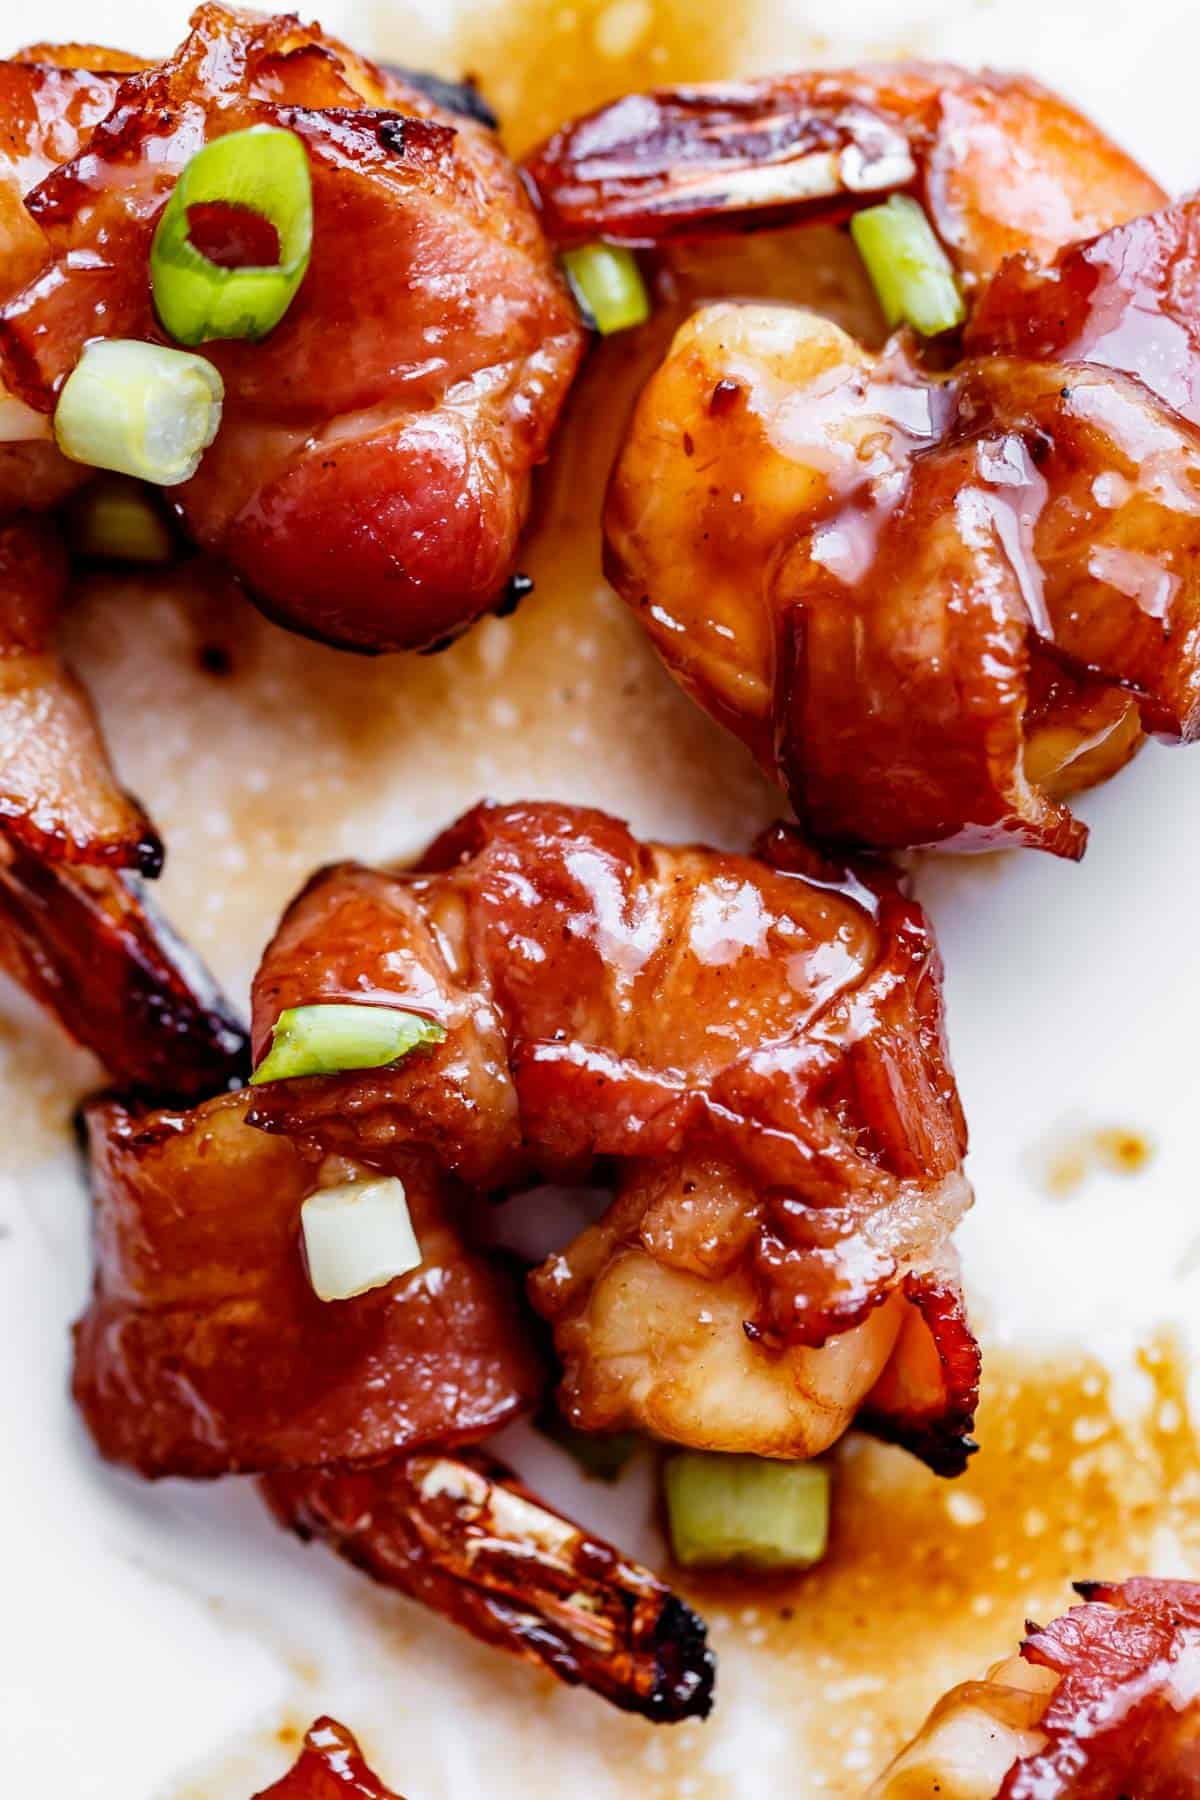 Crispy Bacon Wrapped Shrimp drizzled in an irresistible sticky Honey Garlic Sauce makes the perfect appetizer for any special occasion!